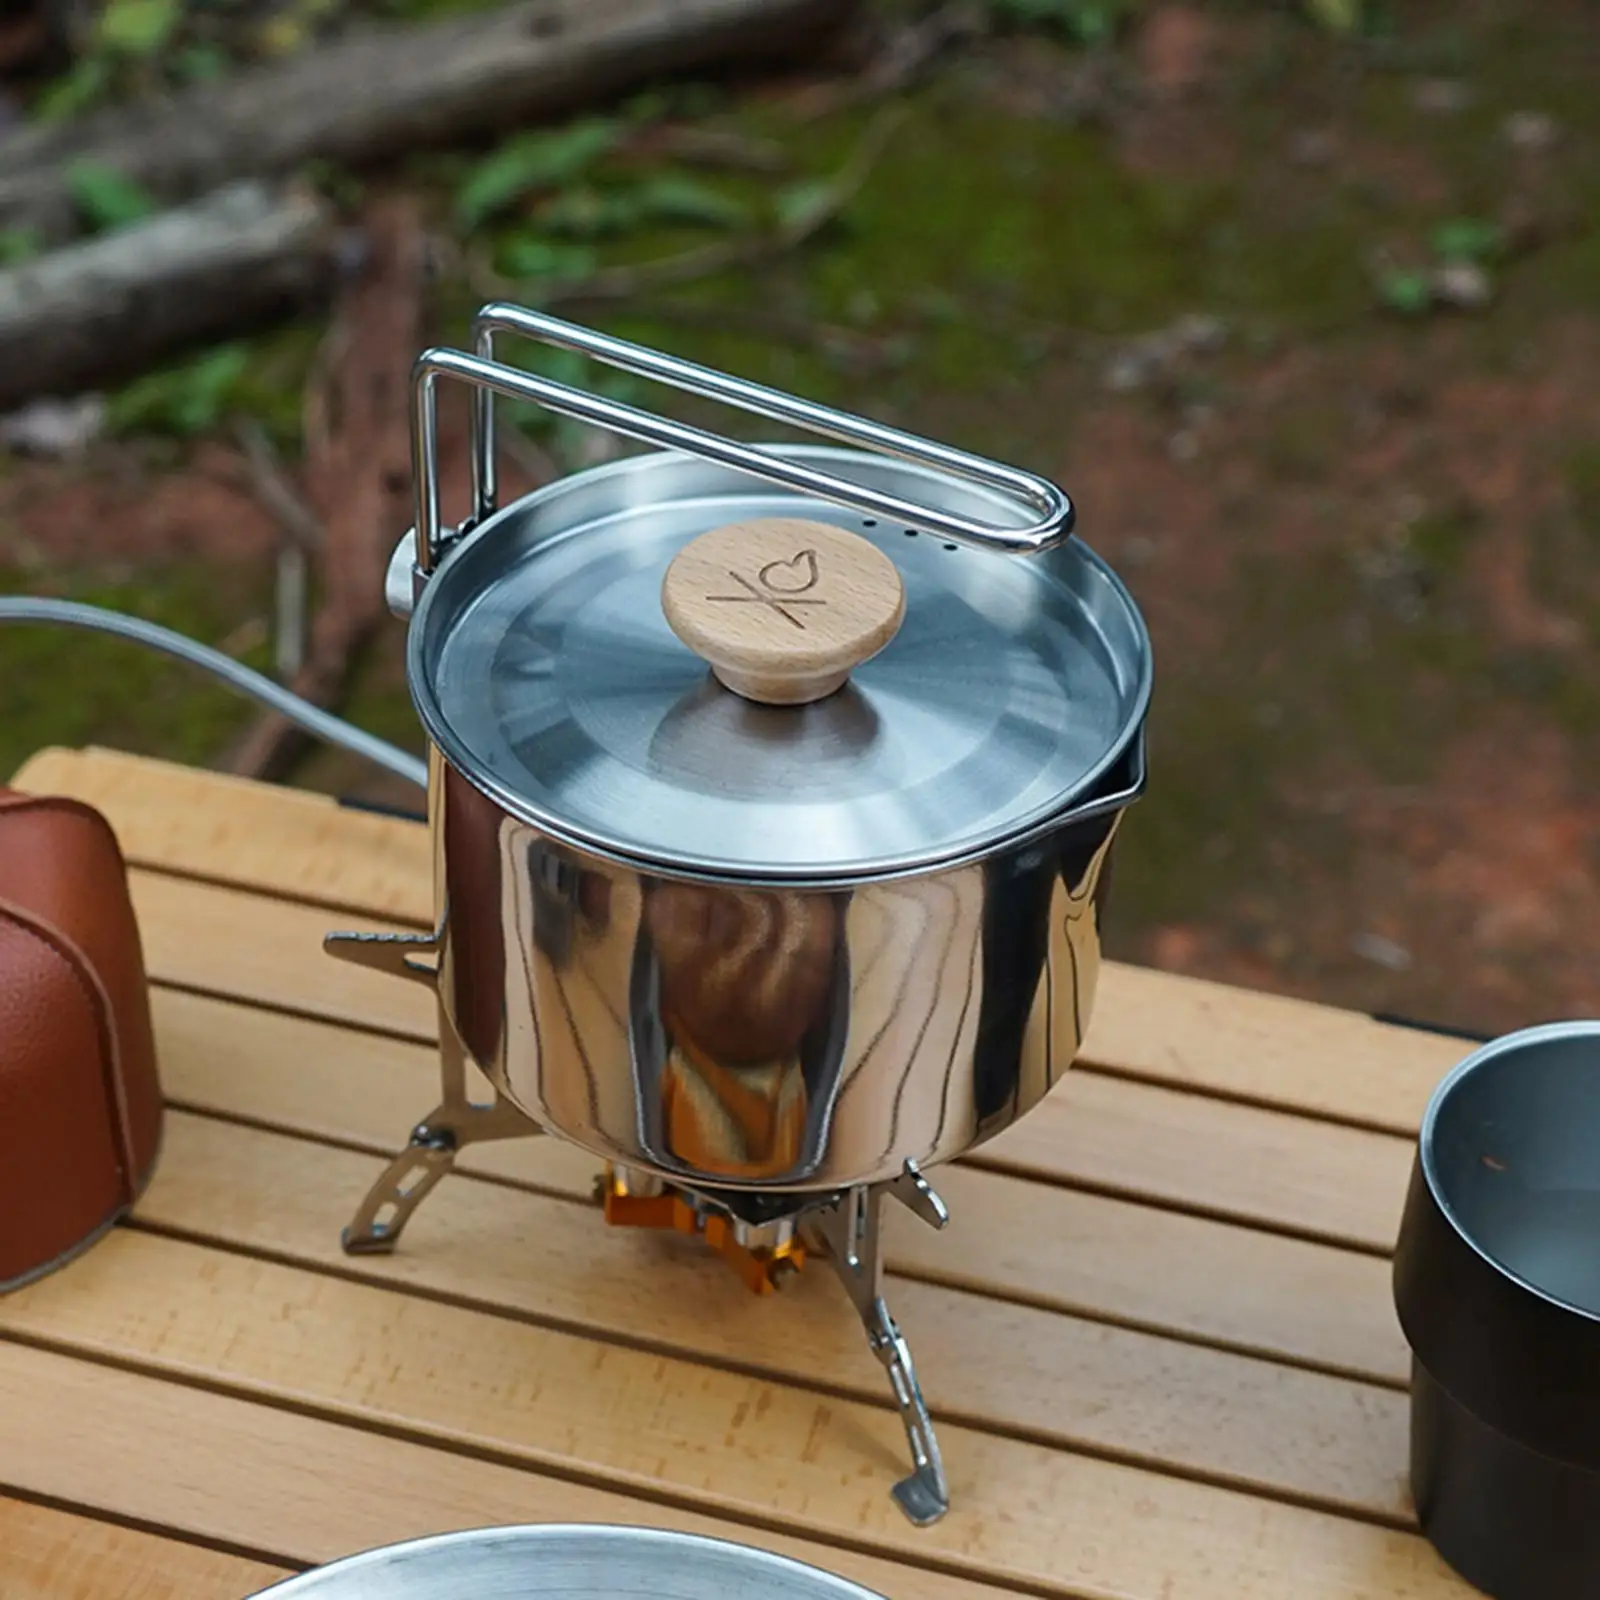 1L Large Capacity Camping Kettle for Boiling Water Stainless Steel Ultralight Coffee Pot with Handle for Hiking Outdoor Cooking